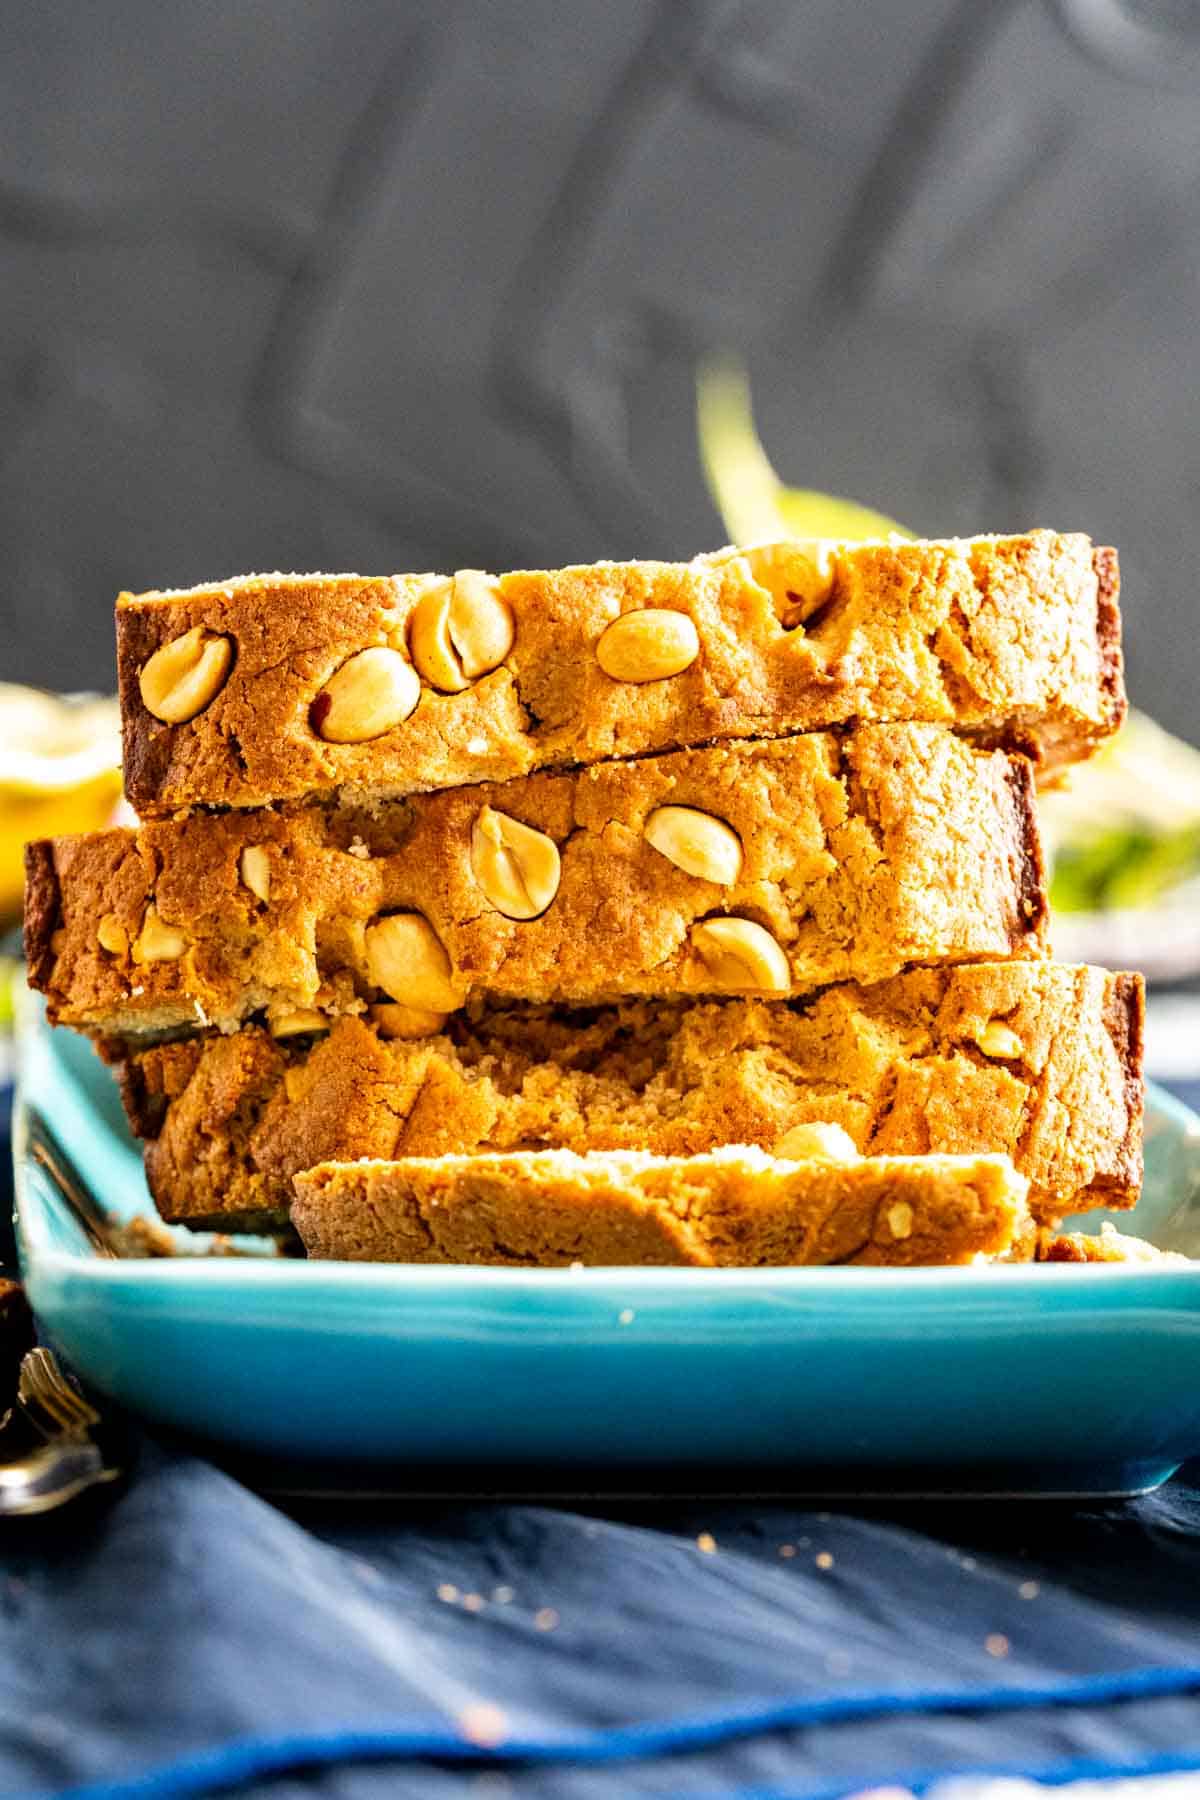 Overlapped slices of peanut quick bread with peanuts sprinkled on the top crust.